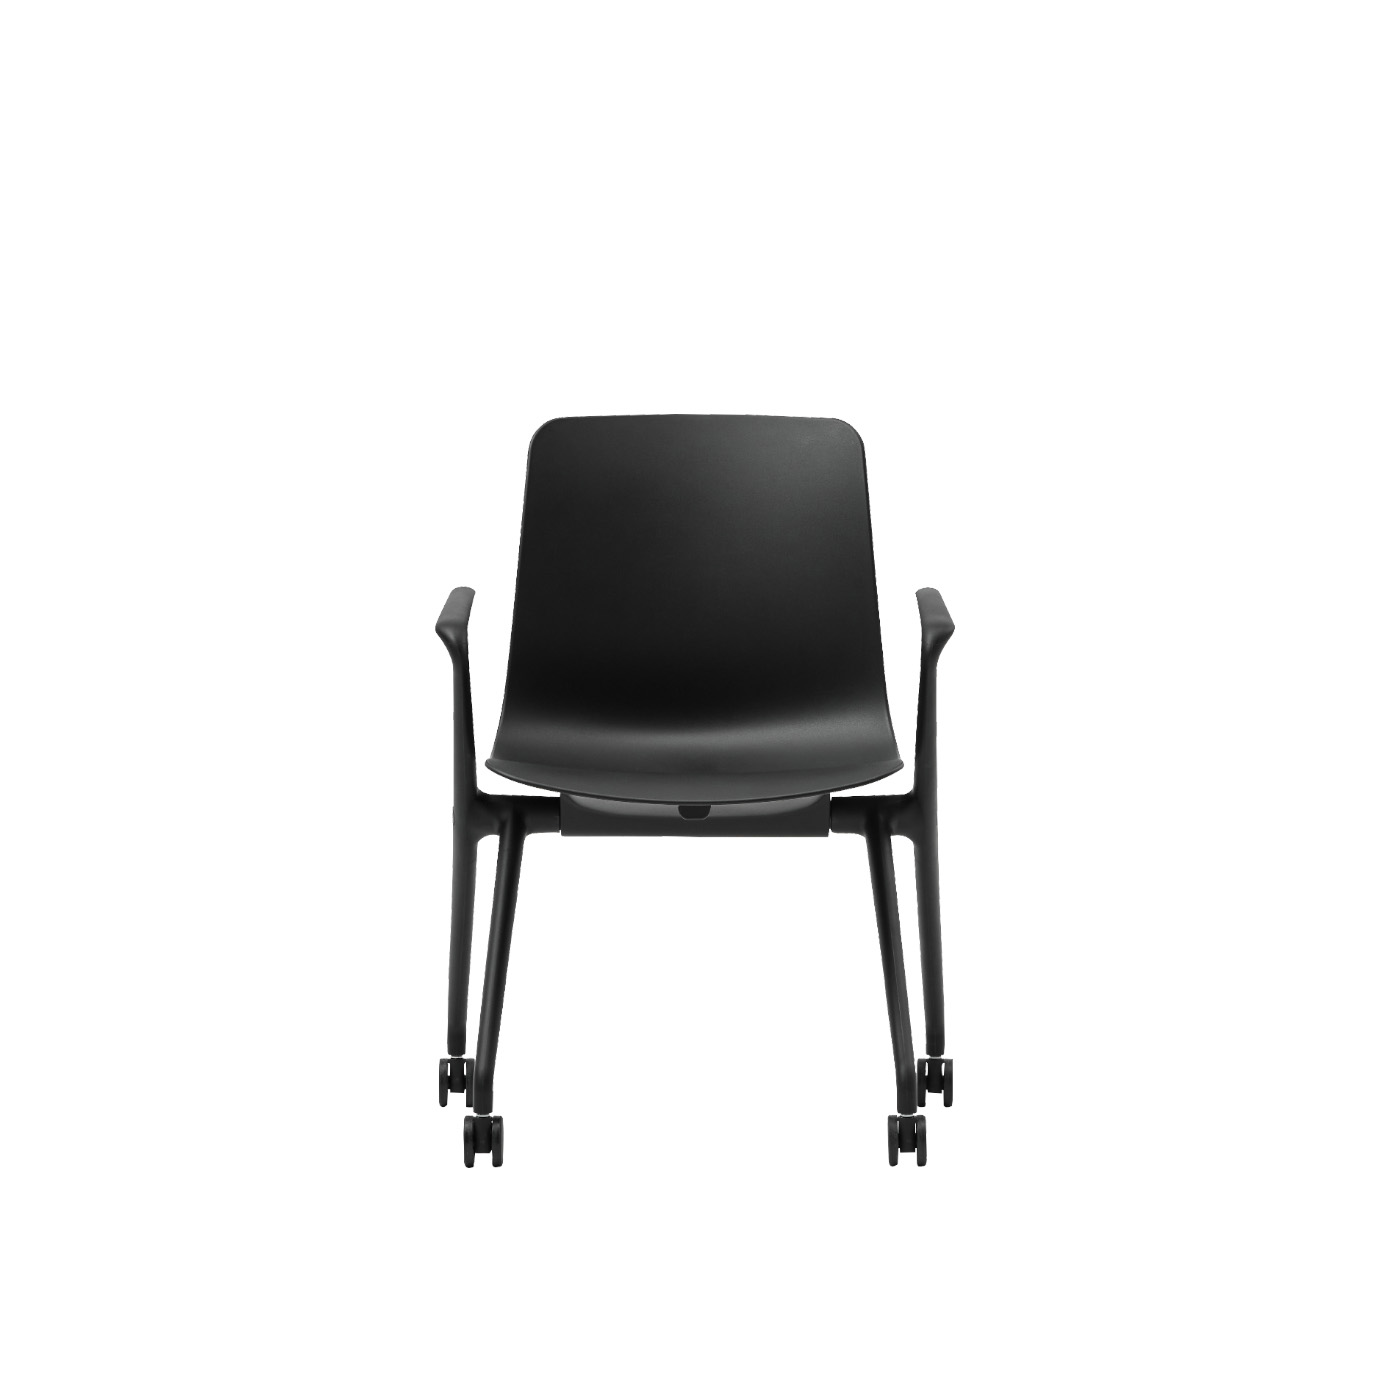 Haworth Bowi conference chair black front angle